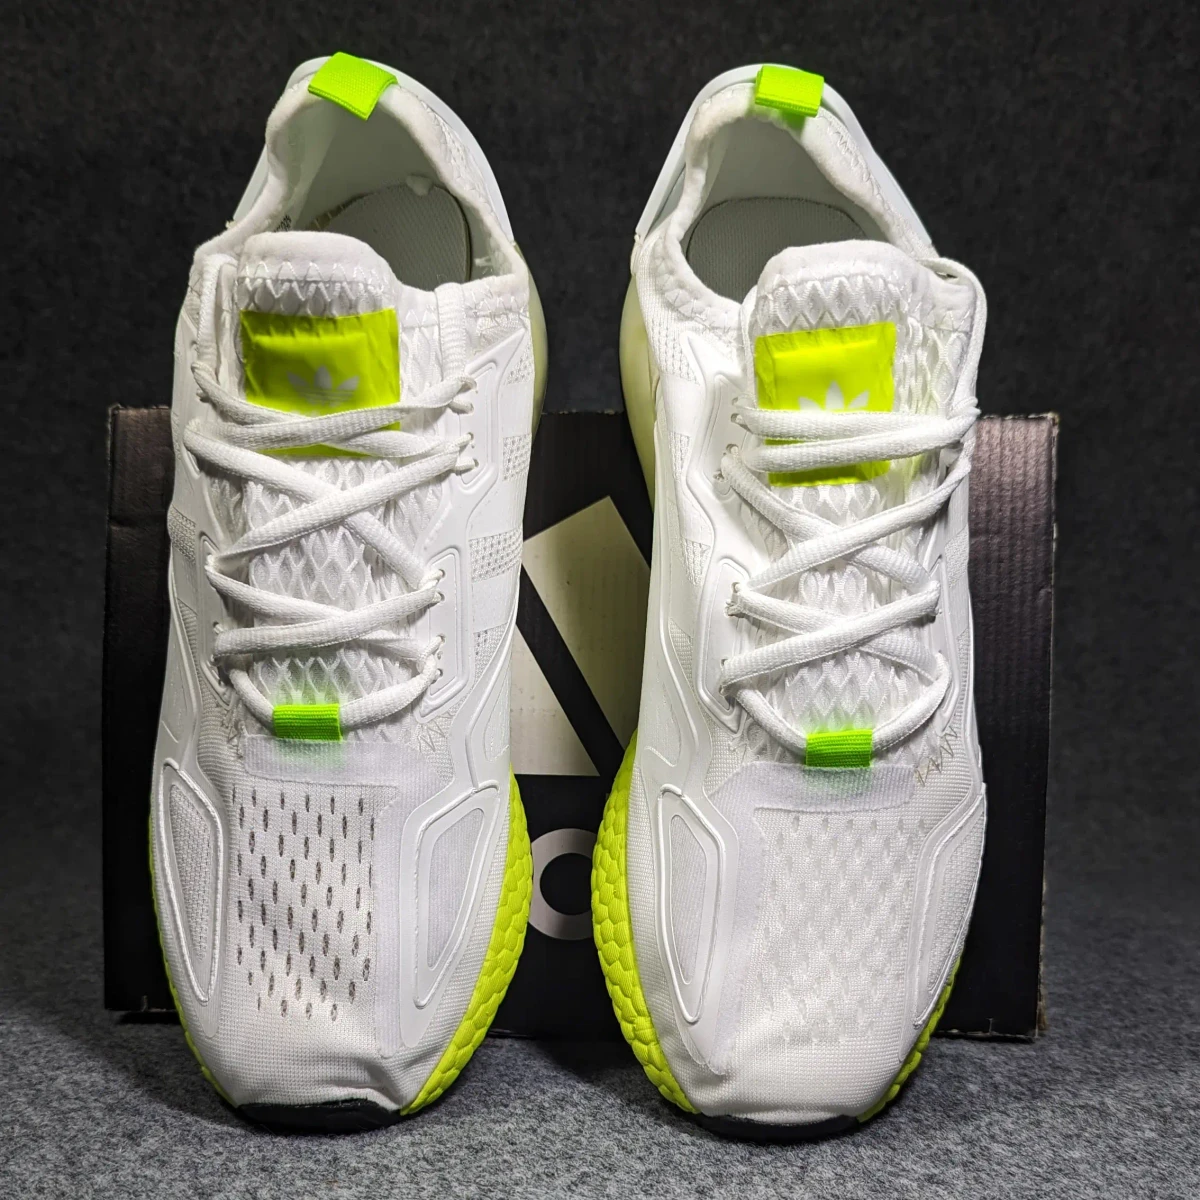 Adidas ZX 2K Boost Cloud White Acid Yellow 1:1 Grade For MAN